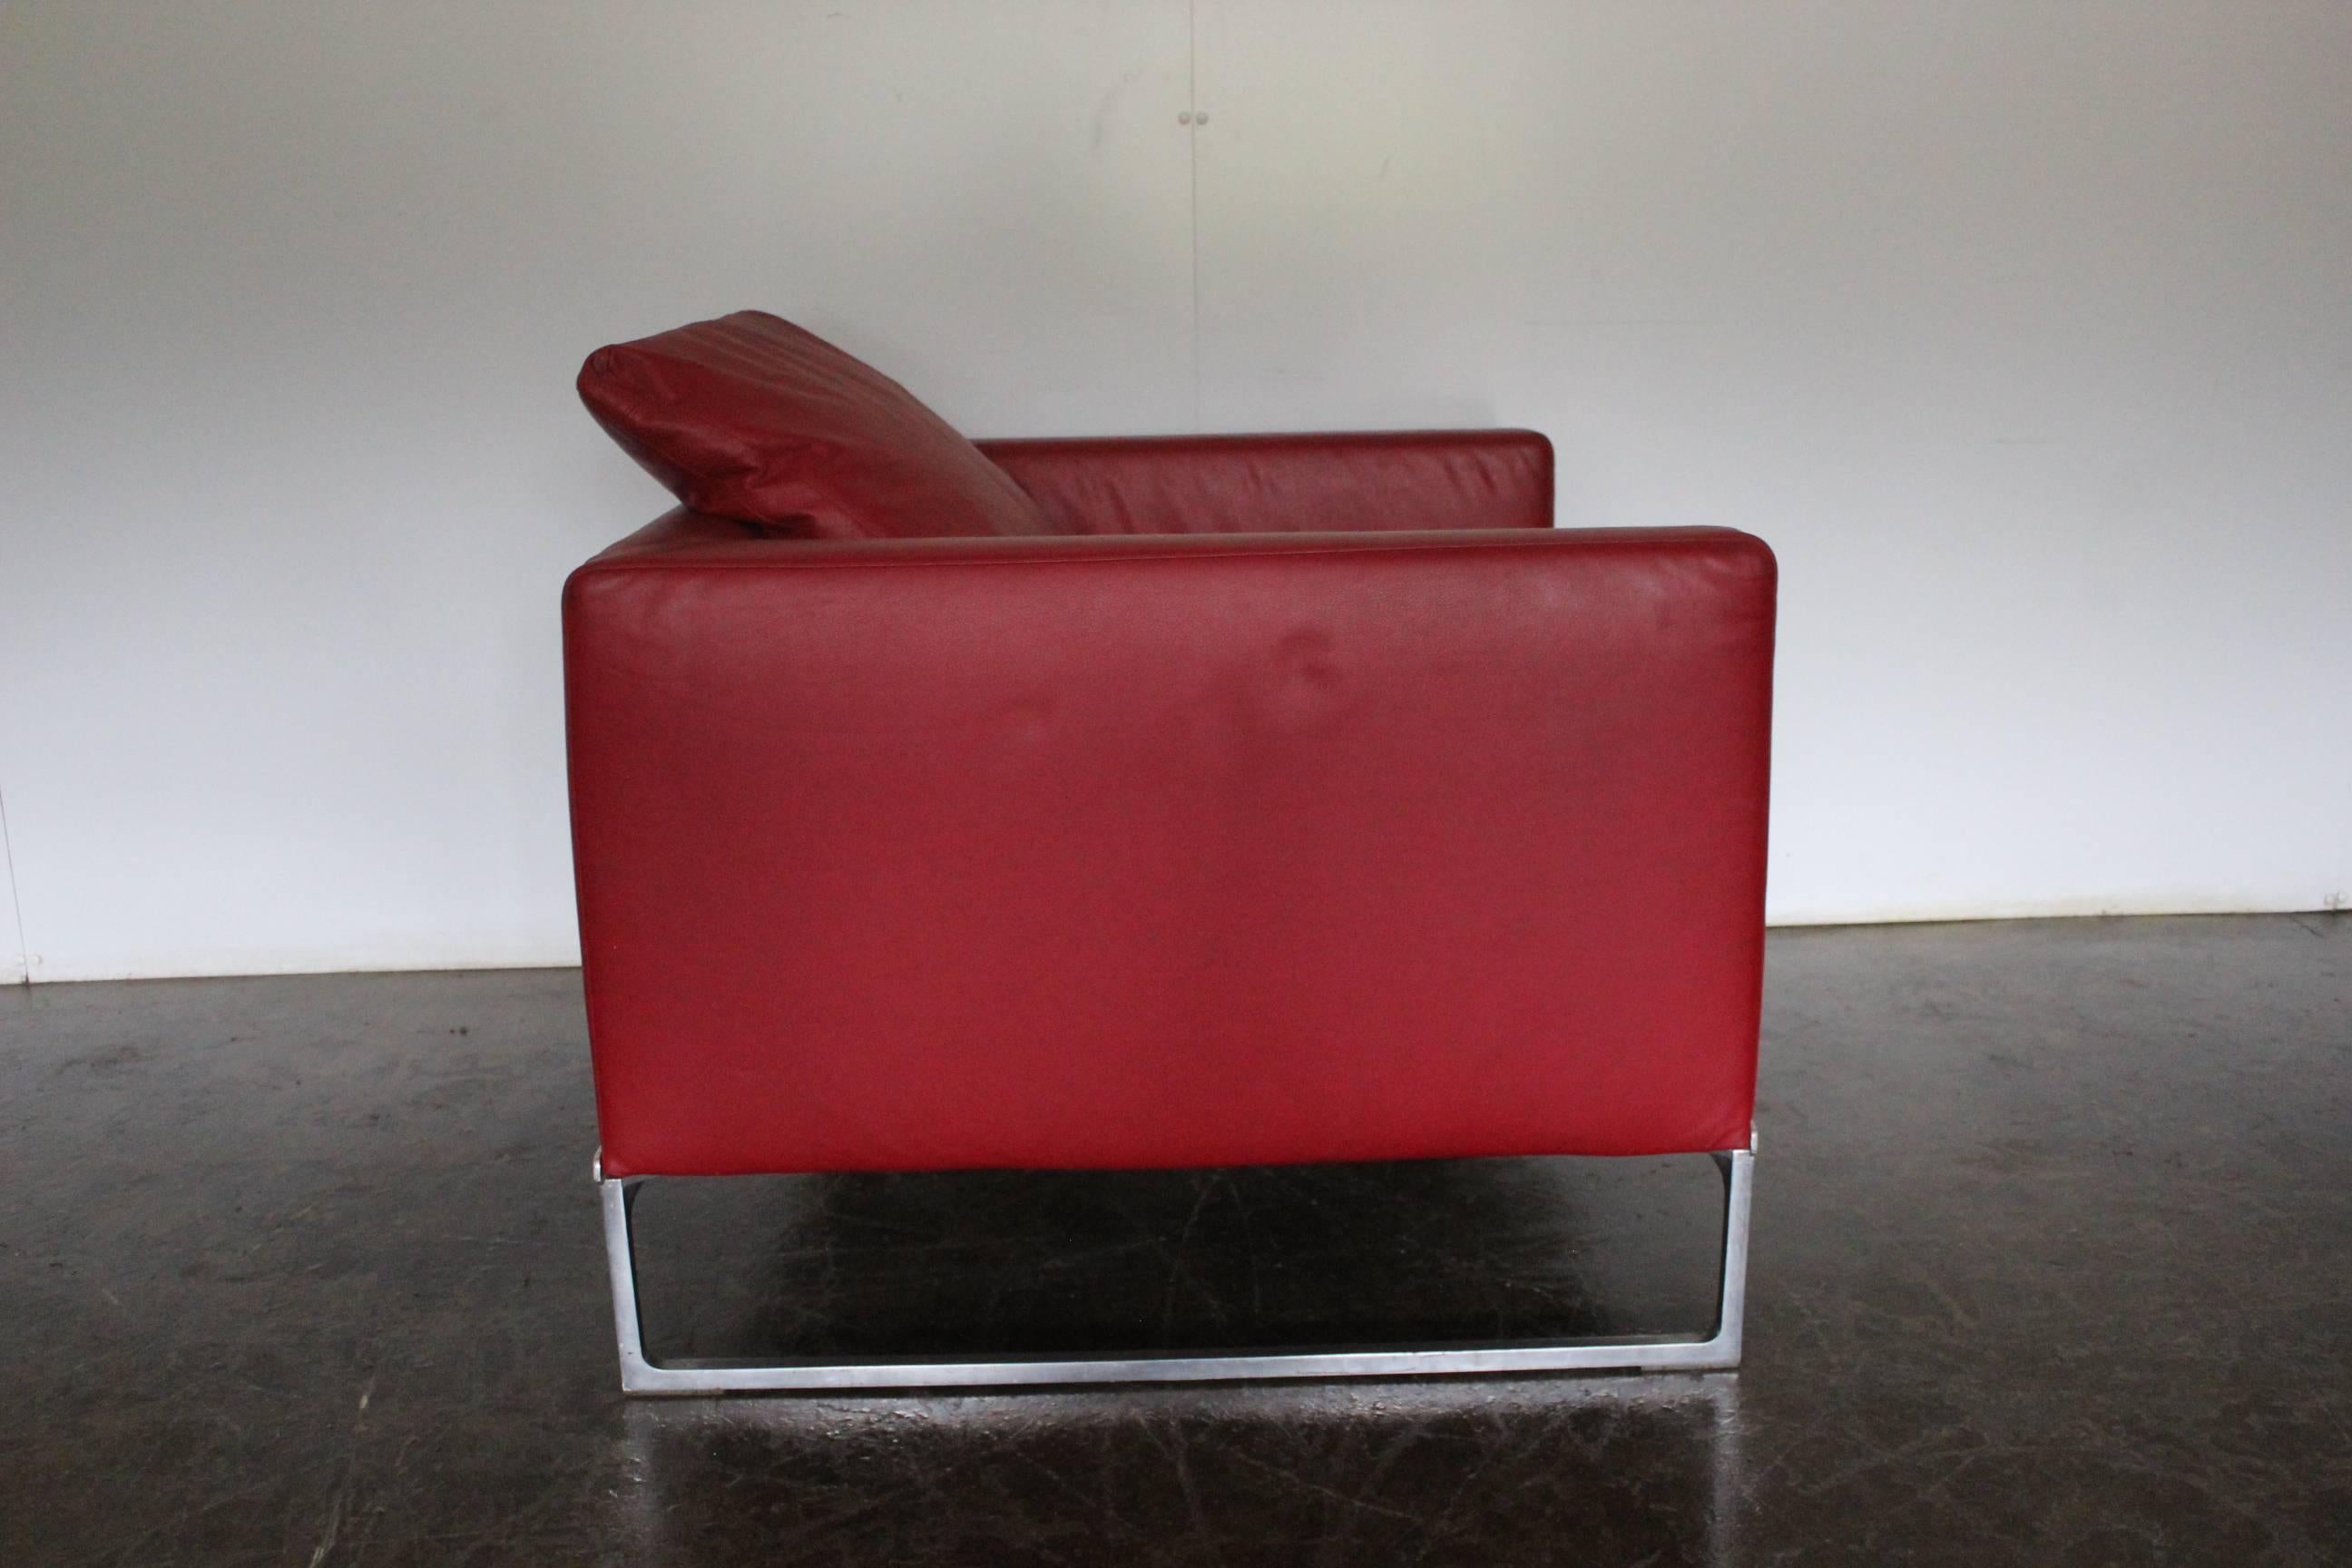 Hand-Crafted B&B Italia “Tight” Large Armchair in “Gamma” Red Leather